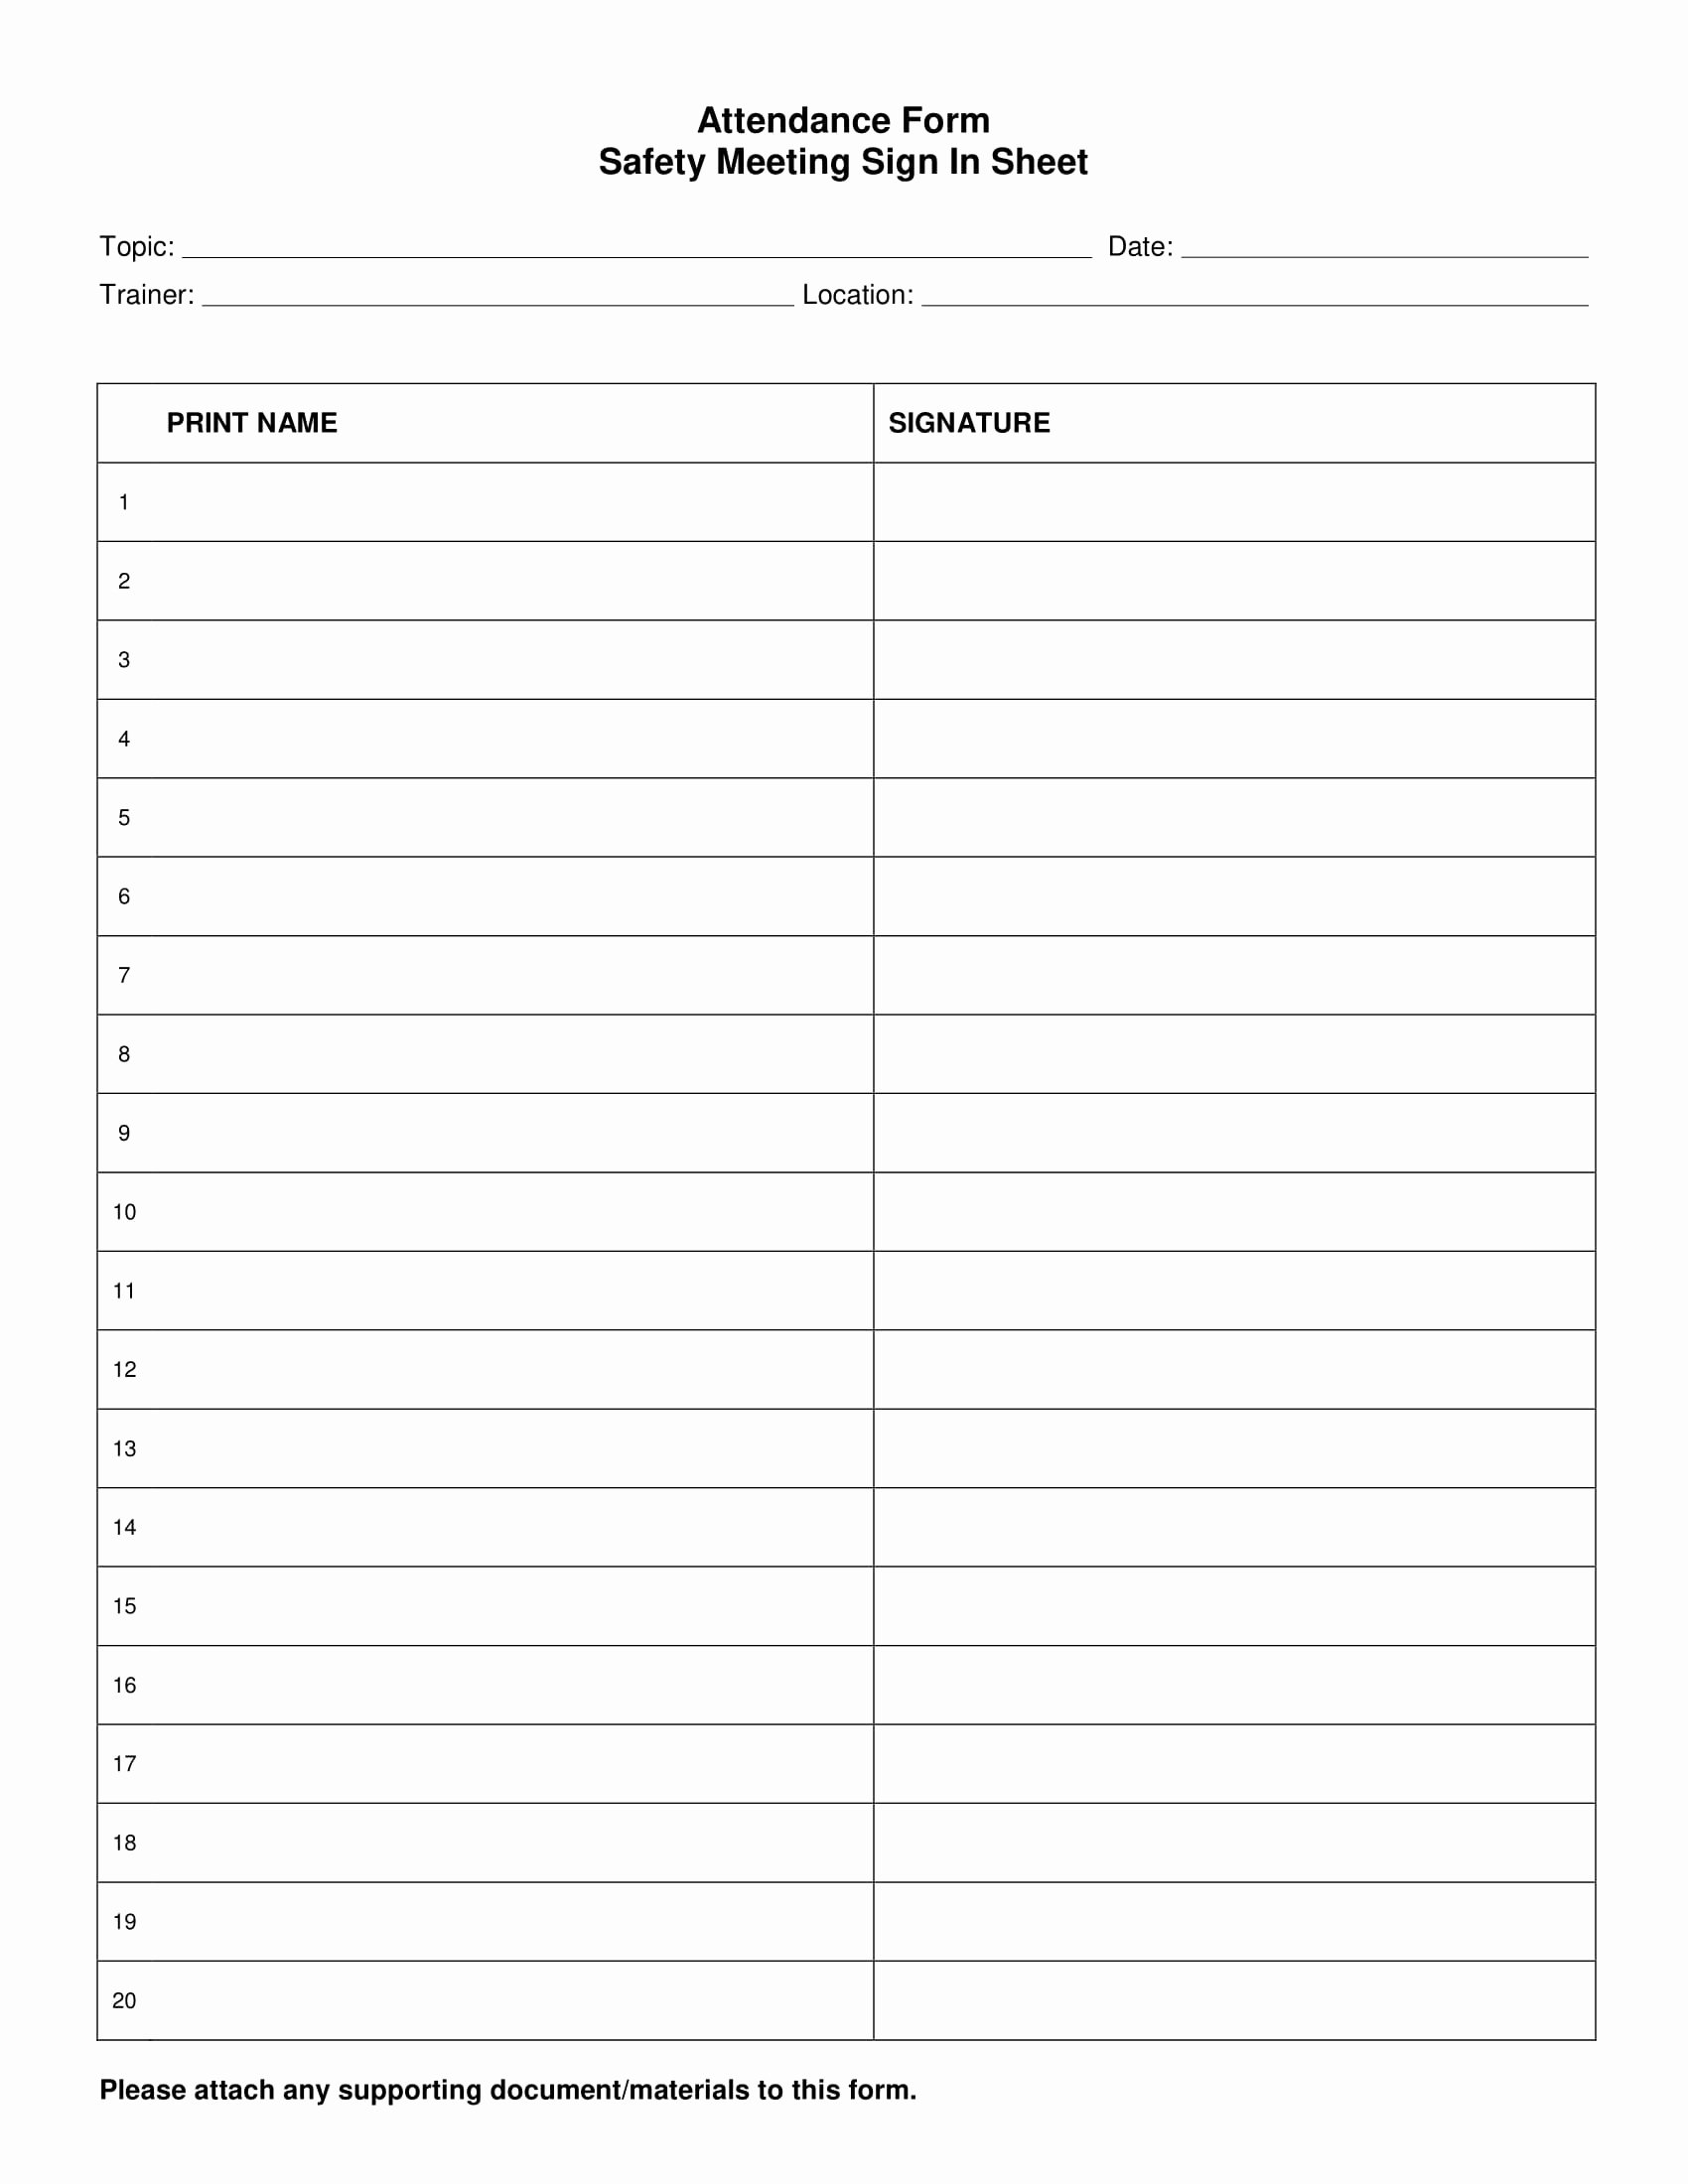 Safety Meeting Sign In Sheet Lovely 9 Employee attendance form Examples Pdf Word